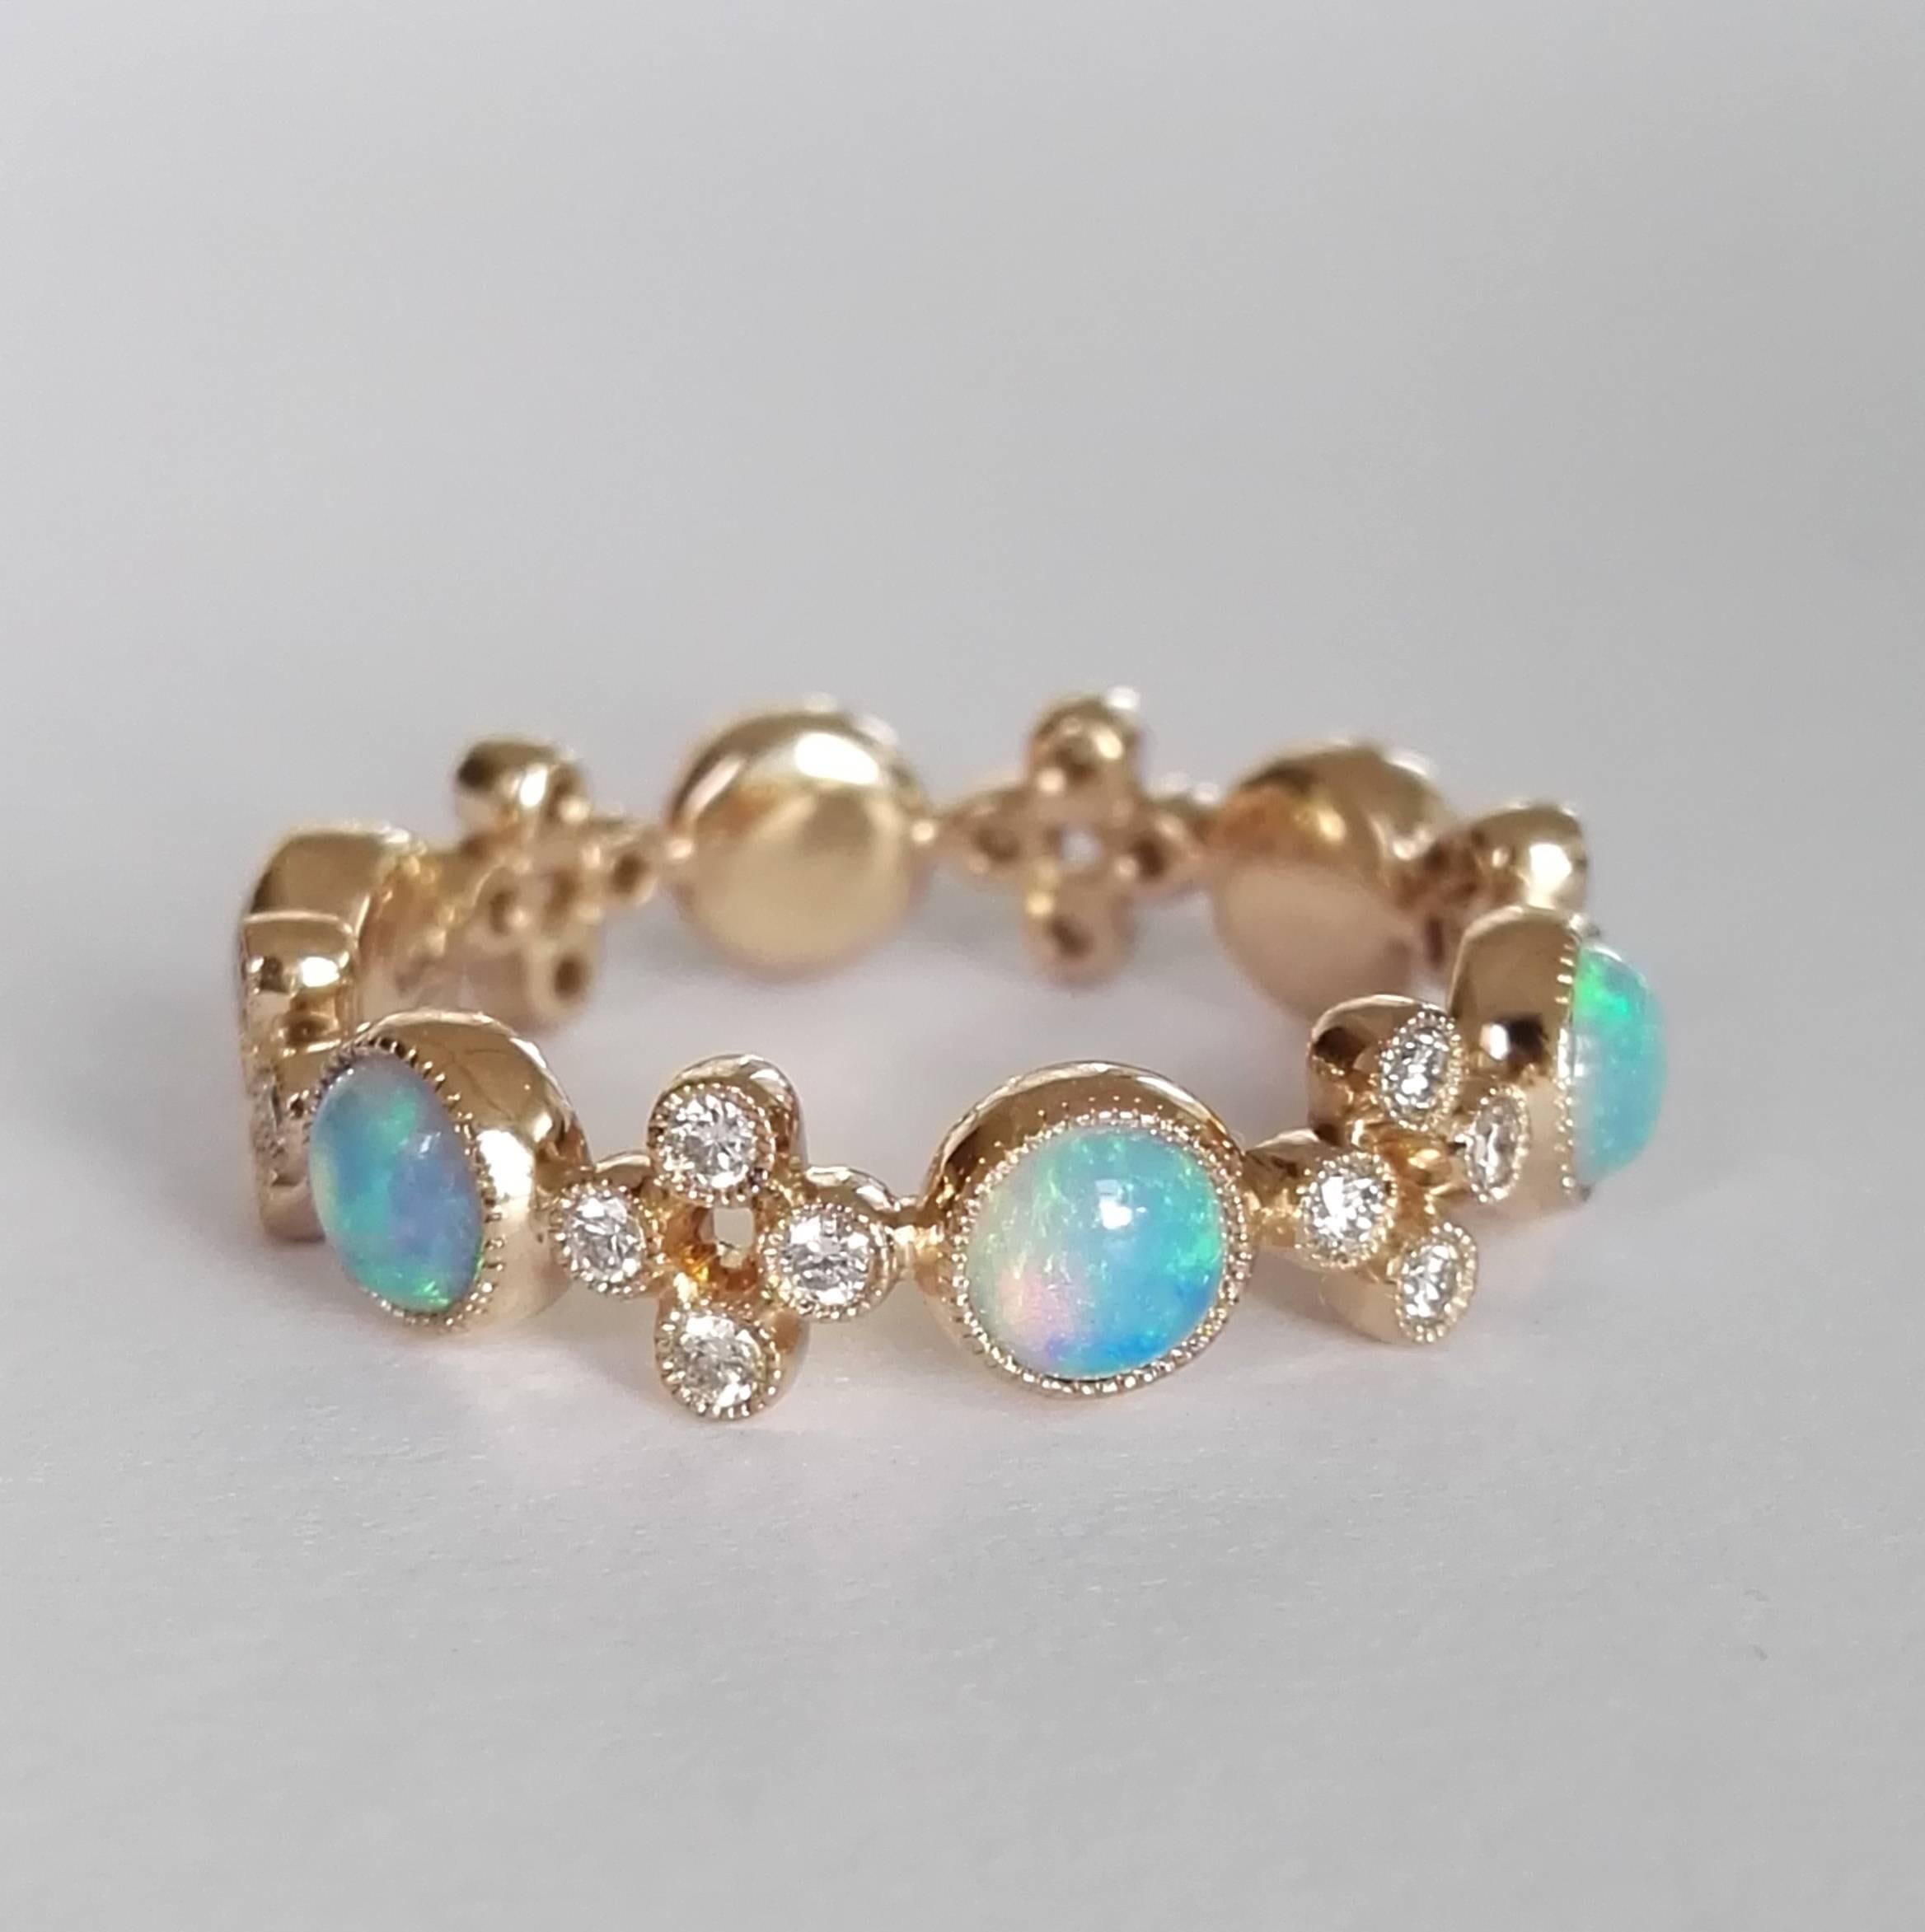 Dalben design Opal band ring with 6 Australian Opals and 24 white round brillant cut Diamonds weighing 0,30 carats mounted in 18 kt warm white gold. 
Ring size7 USA - 54 1/2 EU . 
The Ring has been designed and handcrafted in our atelier in Como